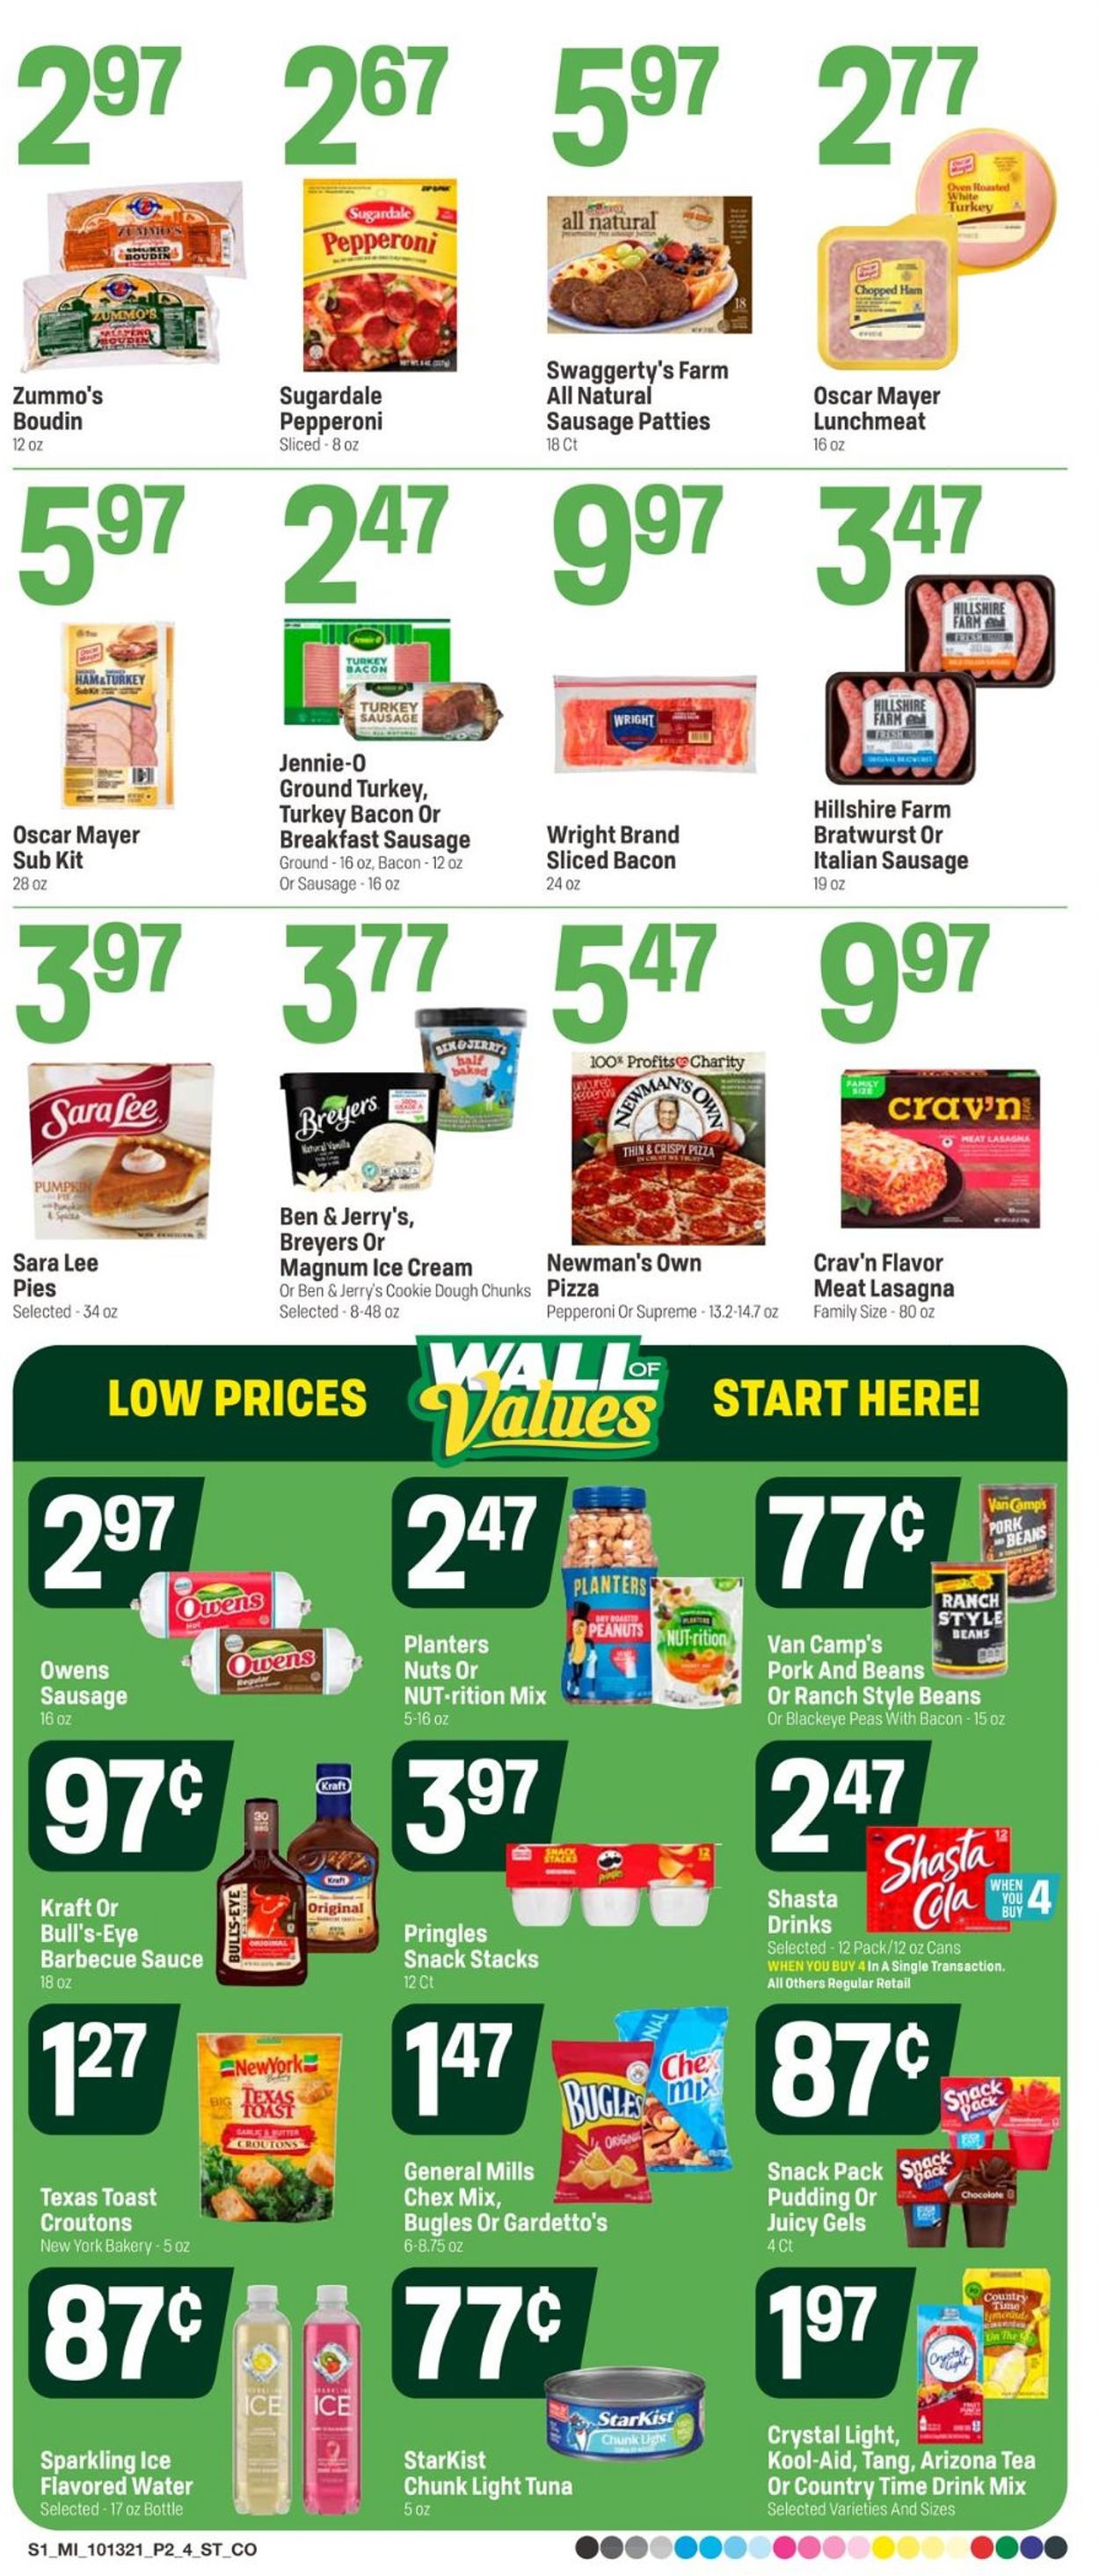 Catalogue Super 1 Foods from 10/13/2021